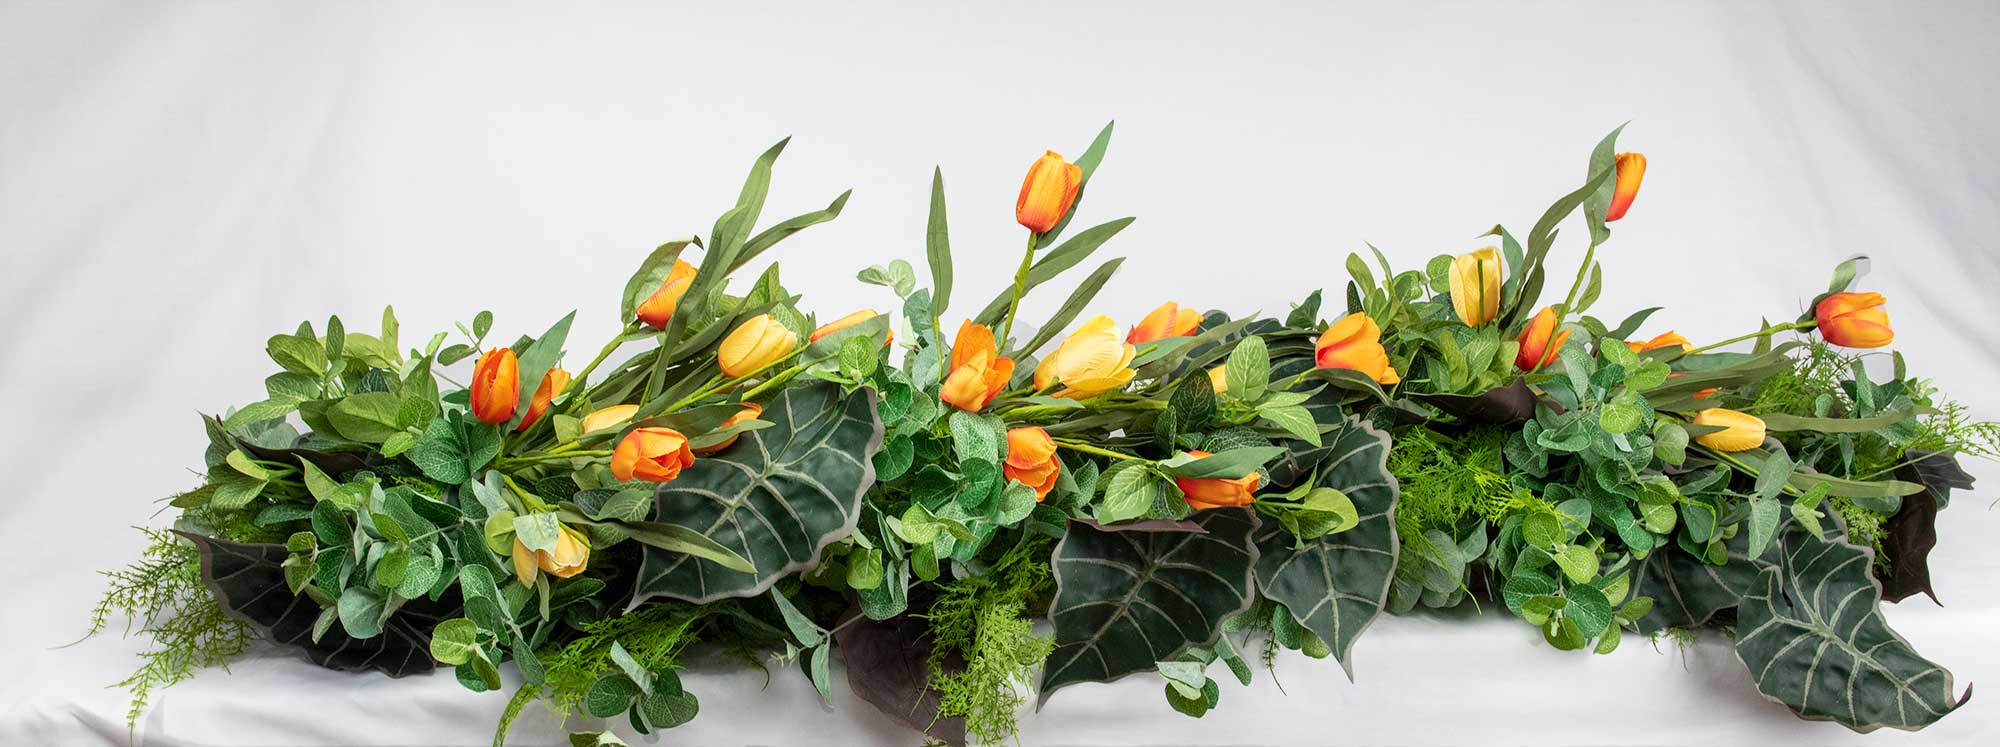 Bridal Table Runners in green with added Foliage and yellow & orange tulips